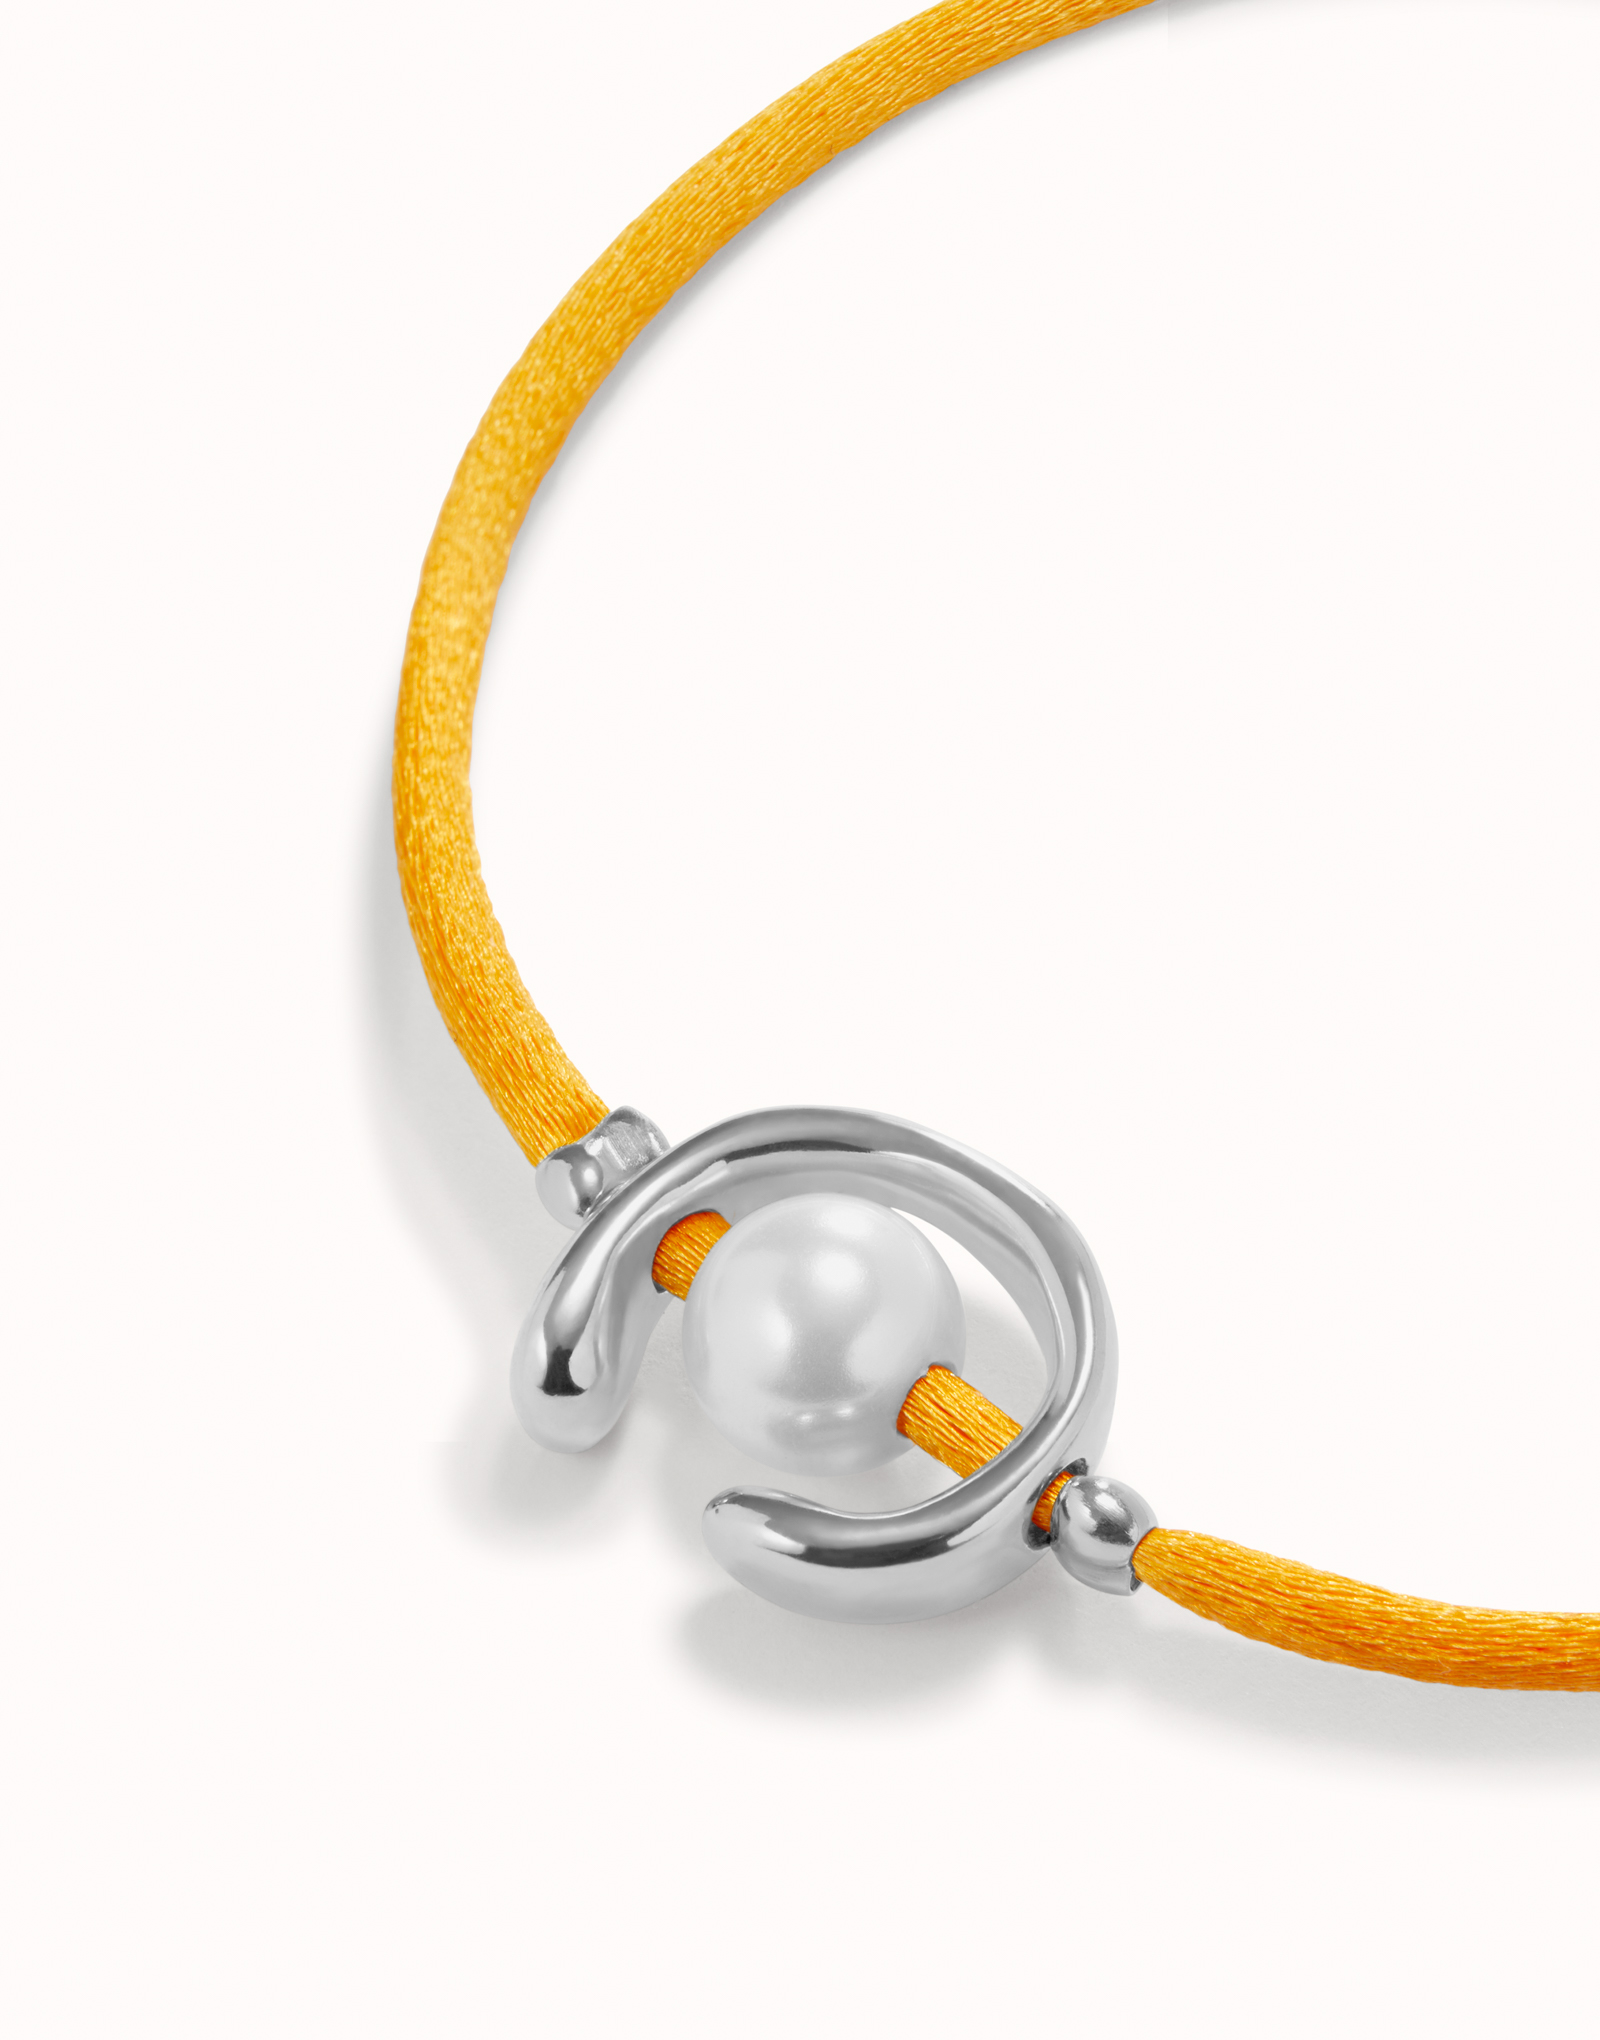 18K gold-plated orange thread bracelet with shell pearl accessory., Golden, large image number null